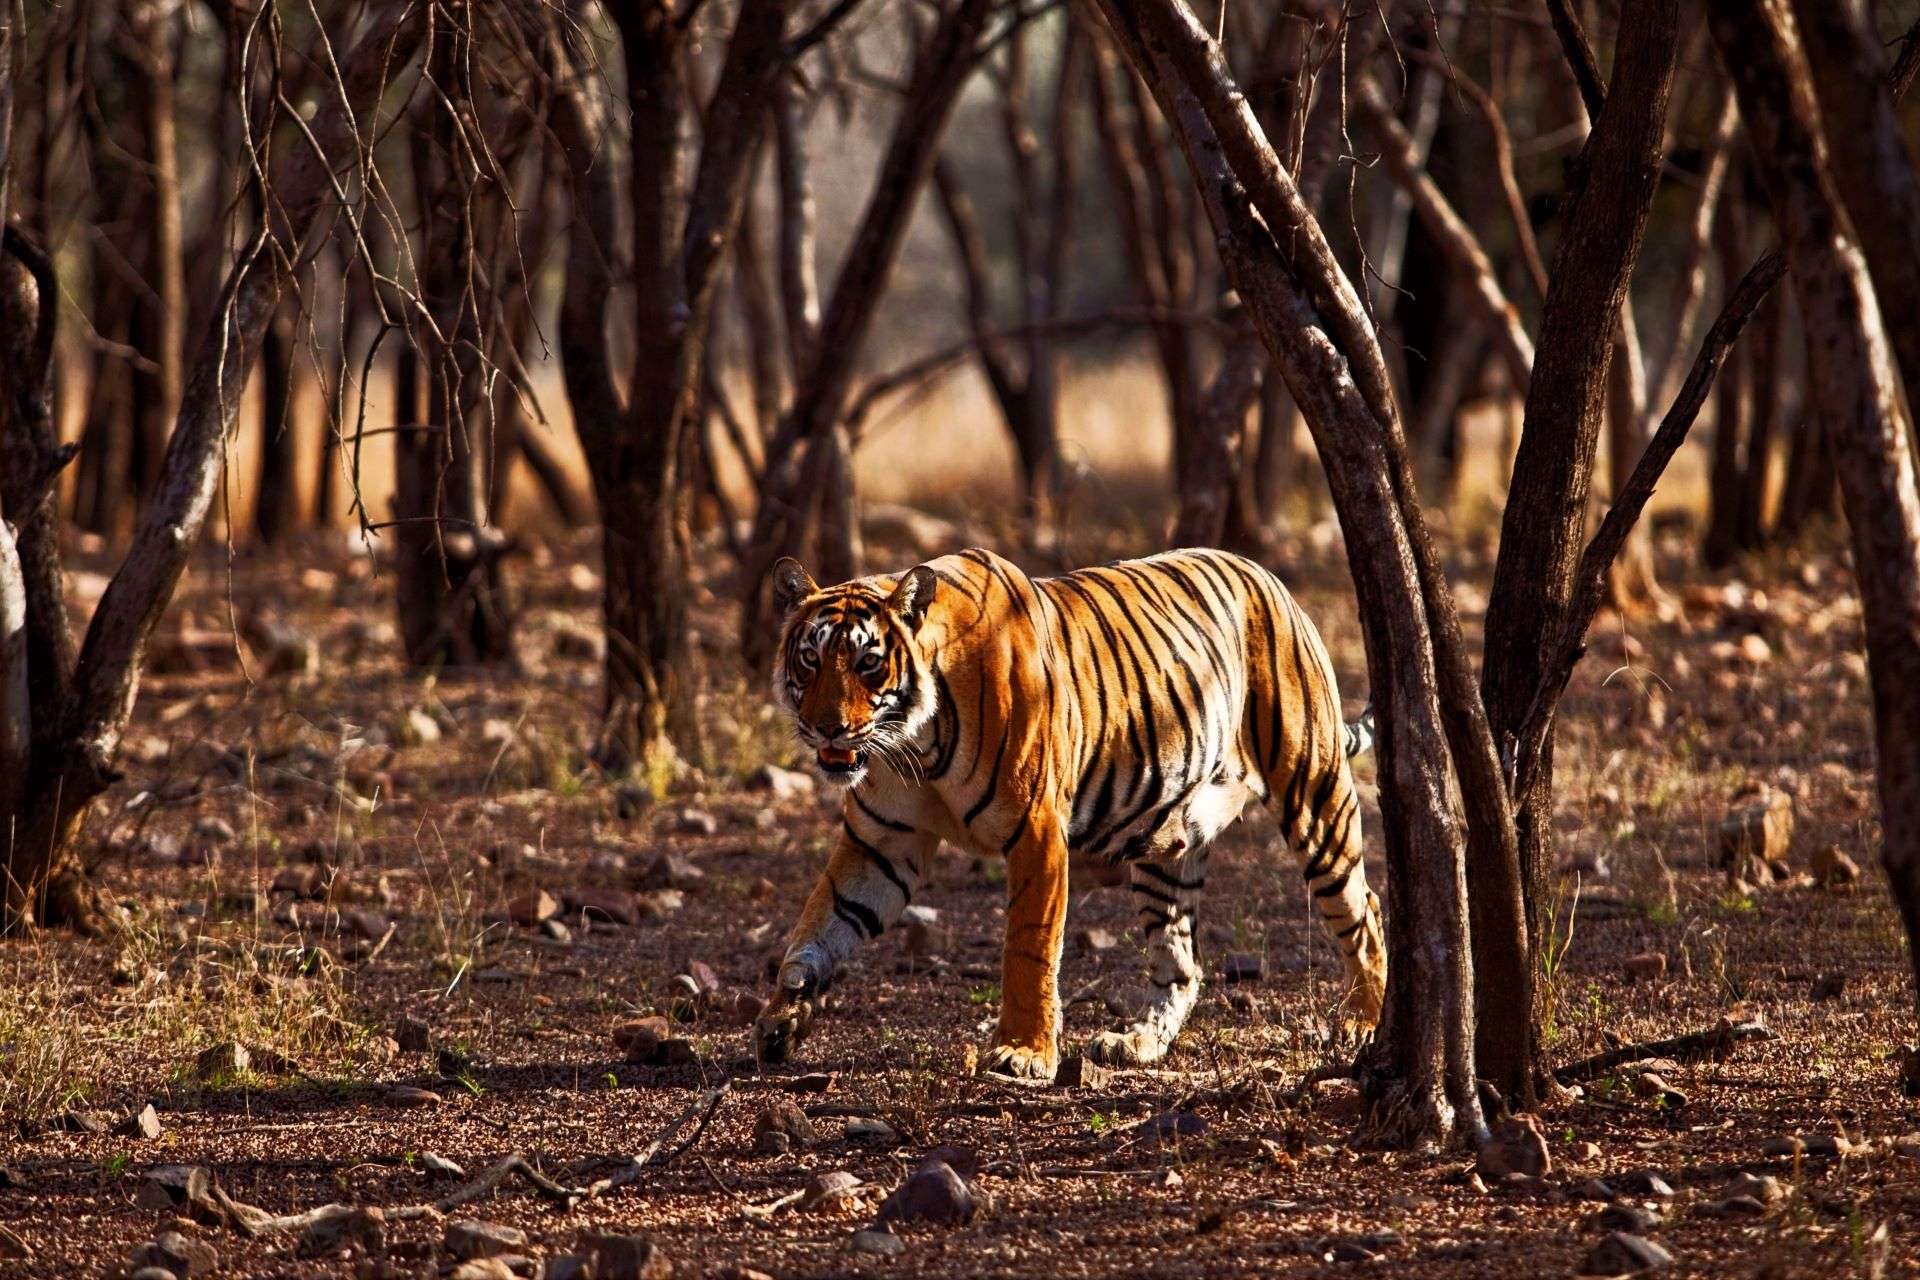 A Tiger walking in a dry forest closely making eye contact with the photographer.